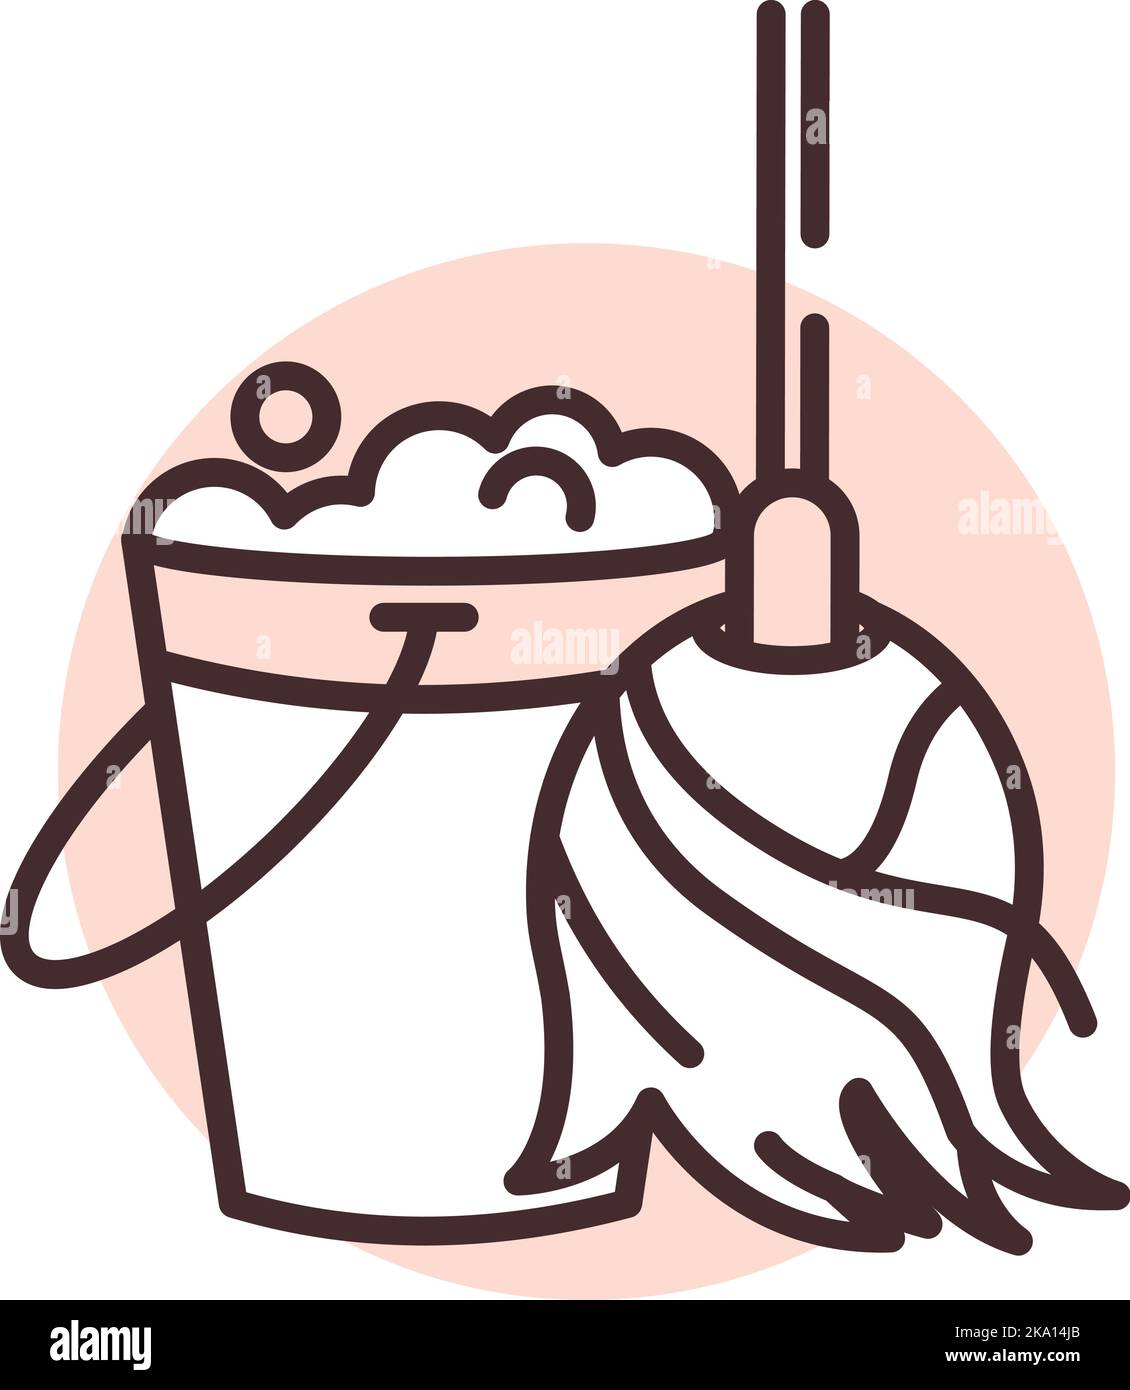 Sanitation mop and bucket, illustration or icon, vector on white background. Stock Vector